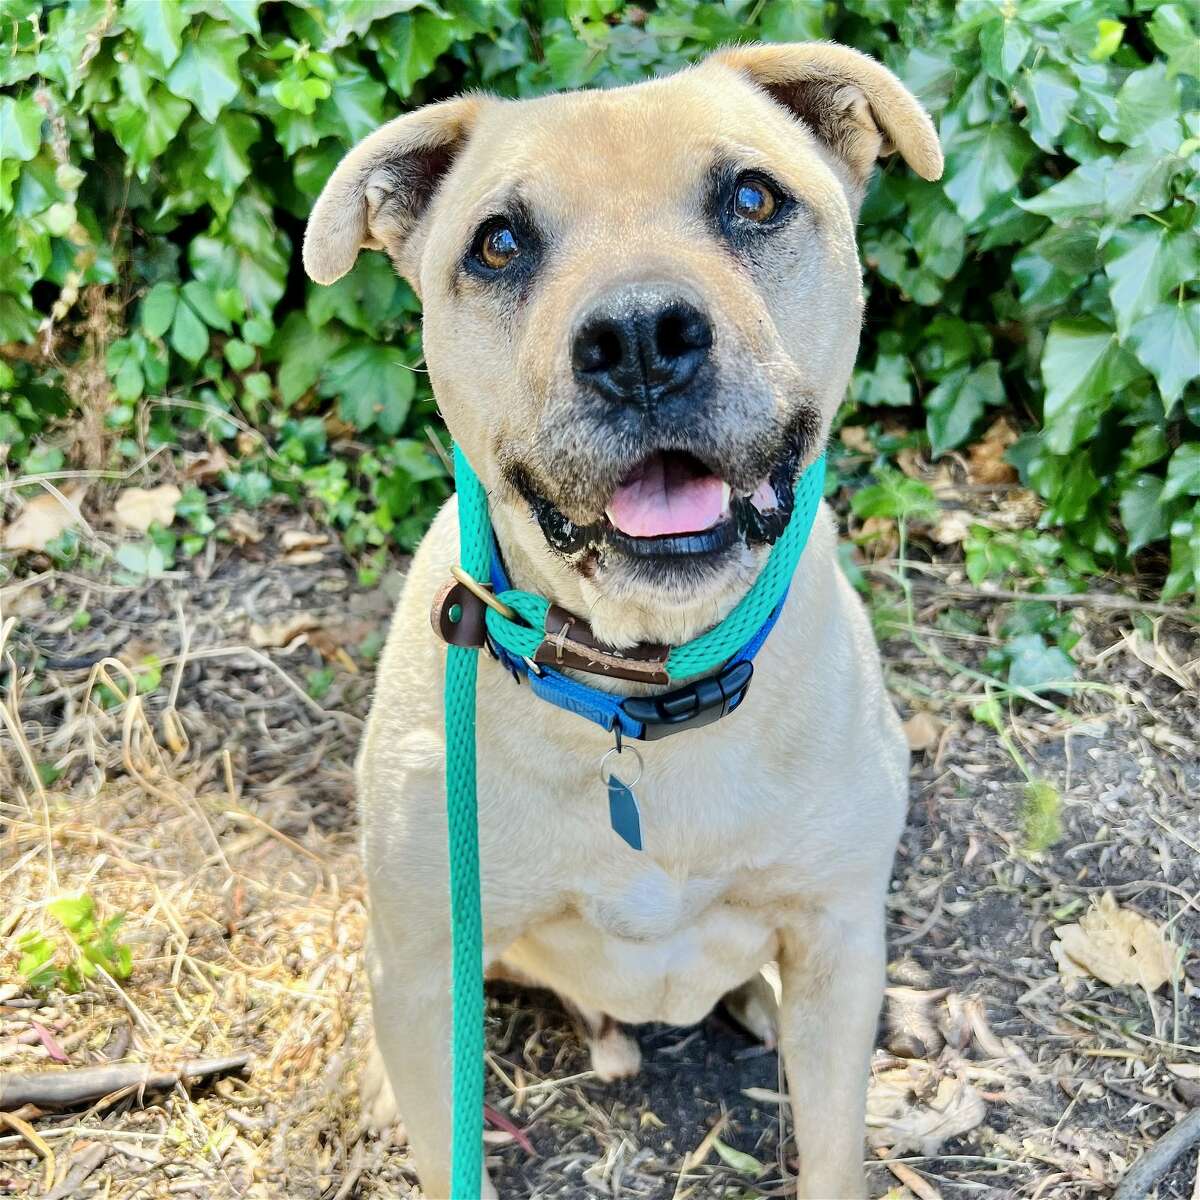 Austin is one of the dogs the Oakland Animal Services has designated as an urgent priority to be adopted. This “affectionate and loyal” senior shepherd-terrier mix has a euthanasia date set for Friday.